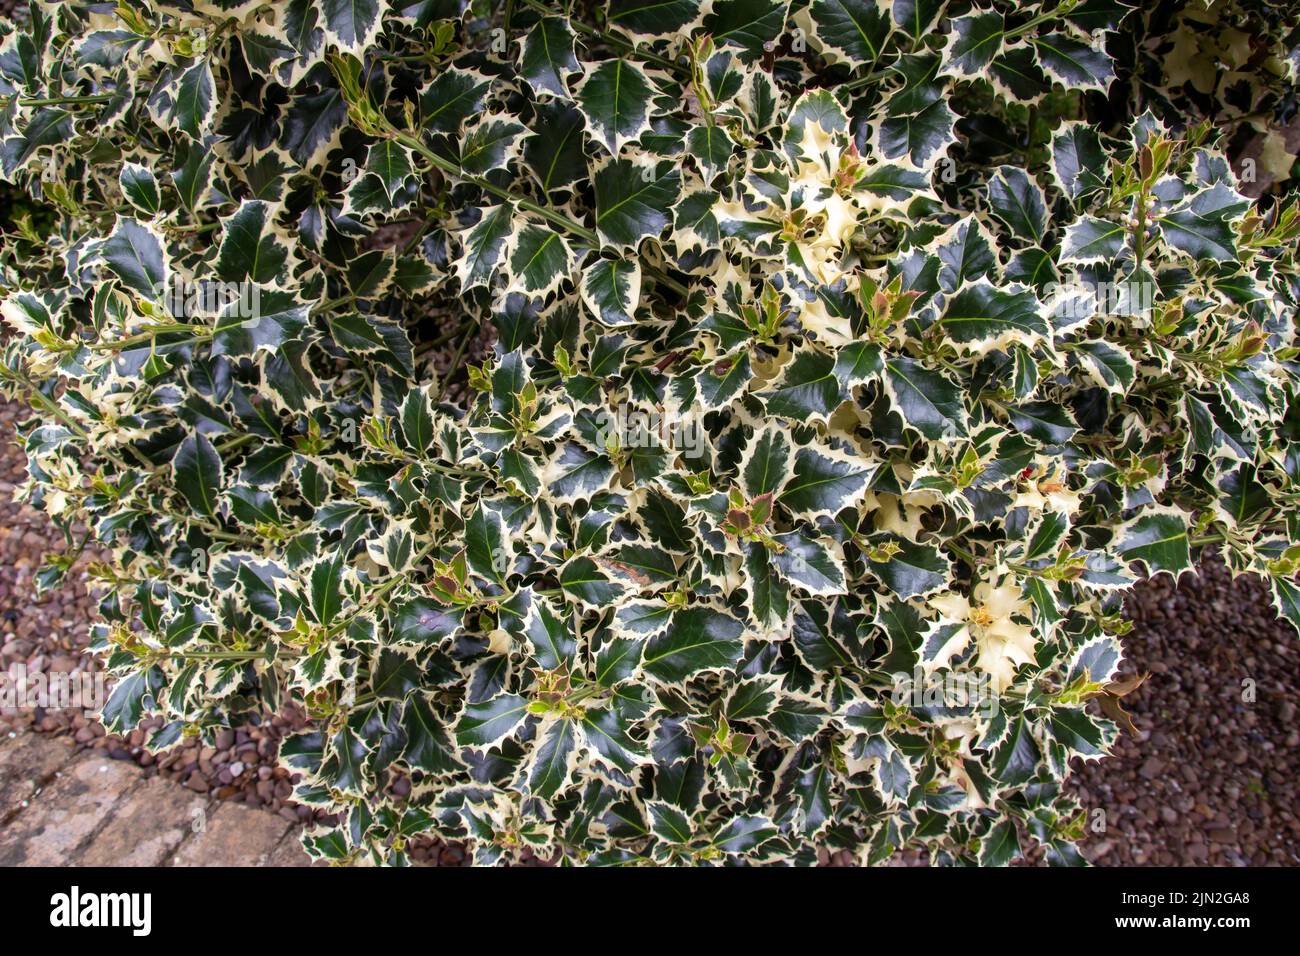 Close up full frame texture background view of a green and white variegated holly bush with lush foliage Stock Photo